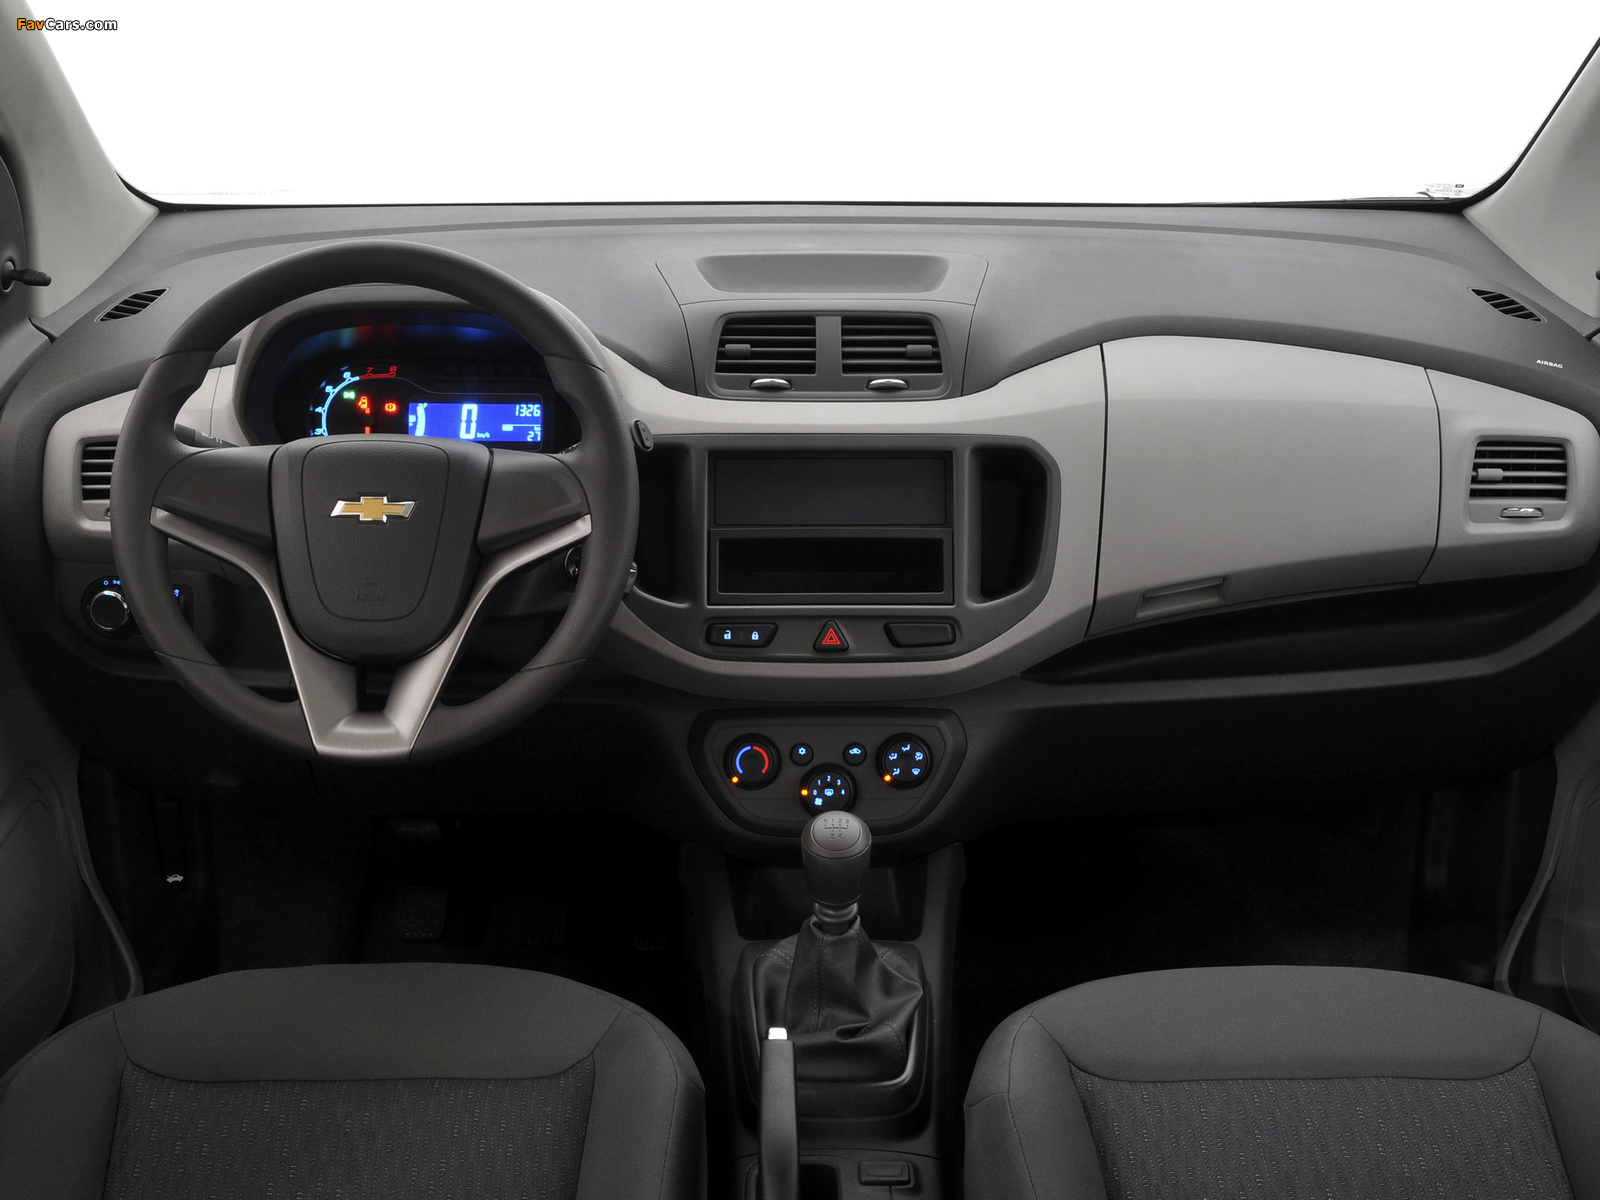 Chevrolet Spin 2012 images (1600 x 1200)